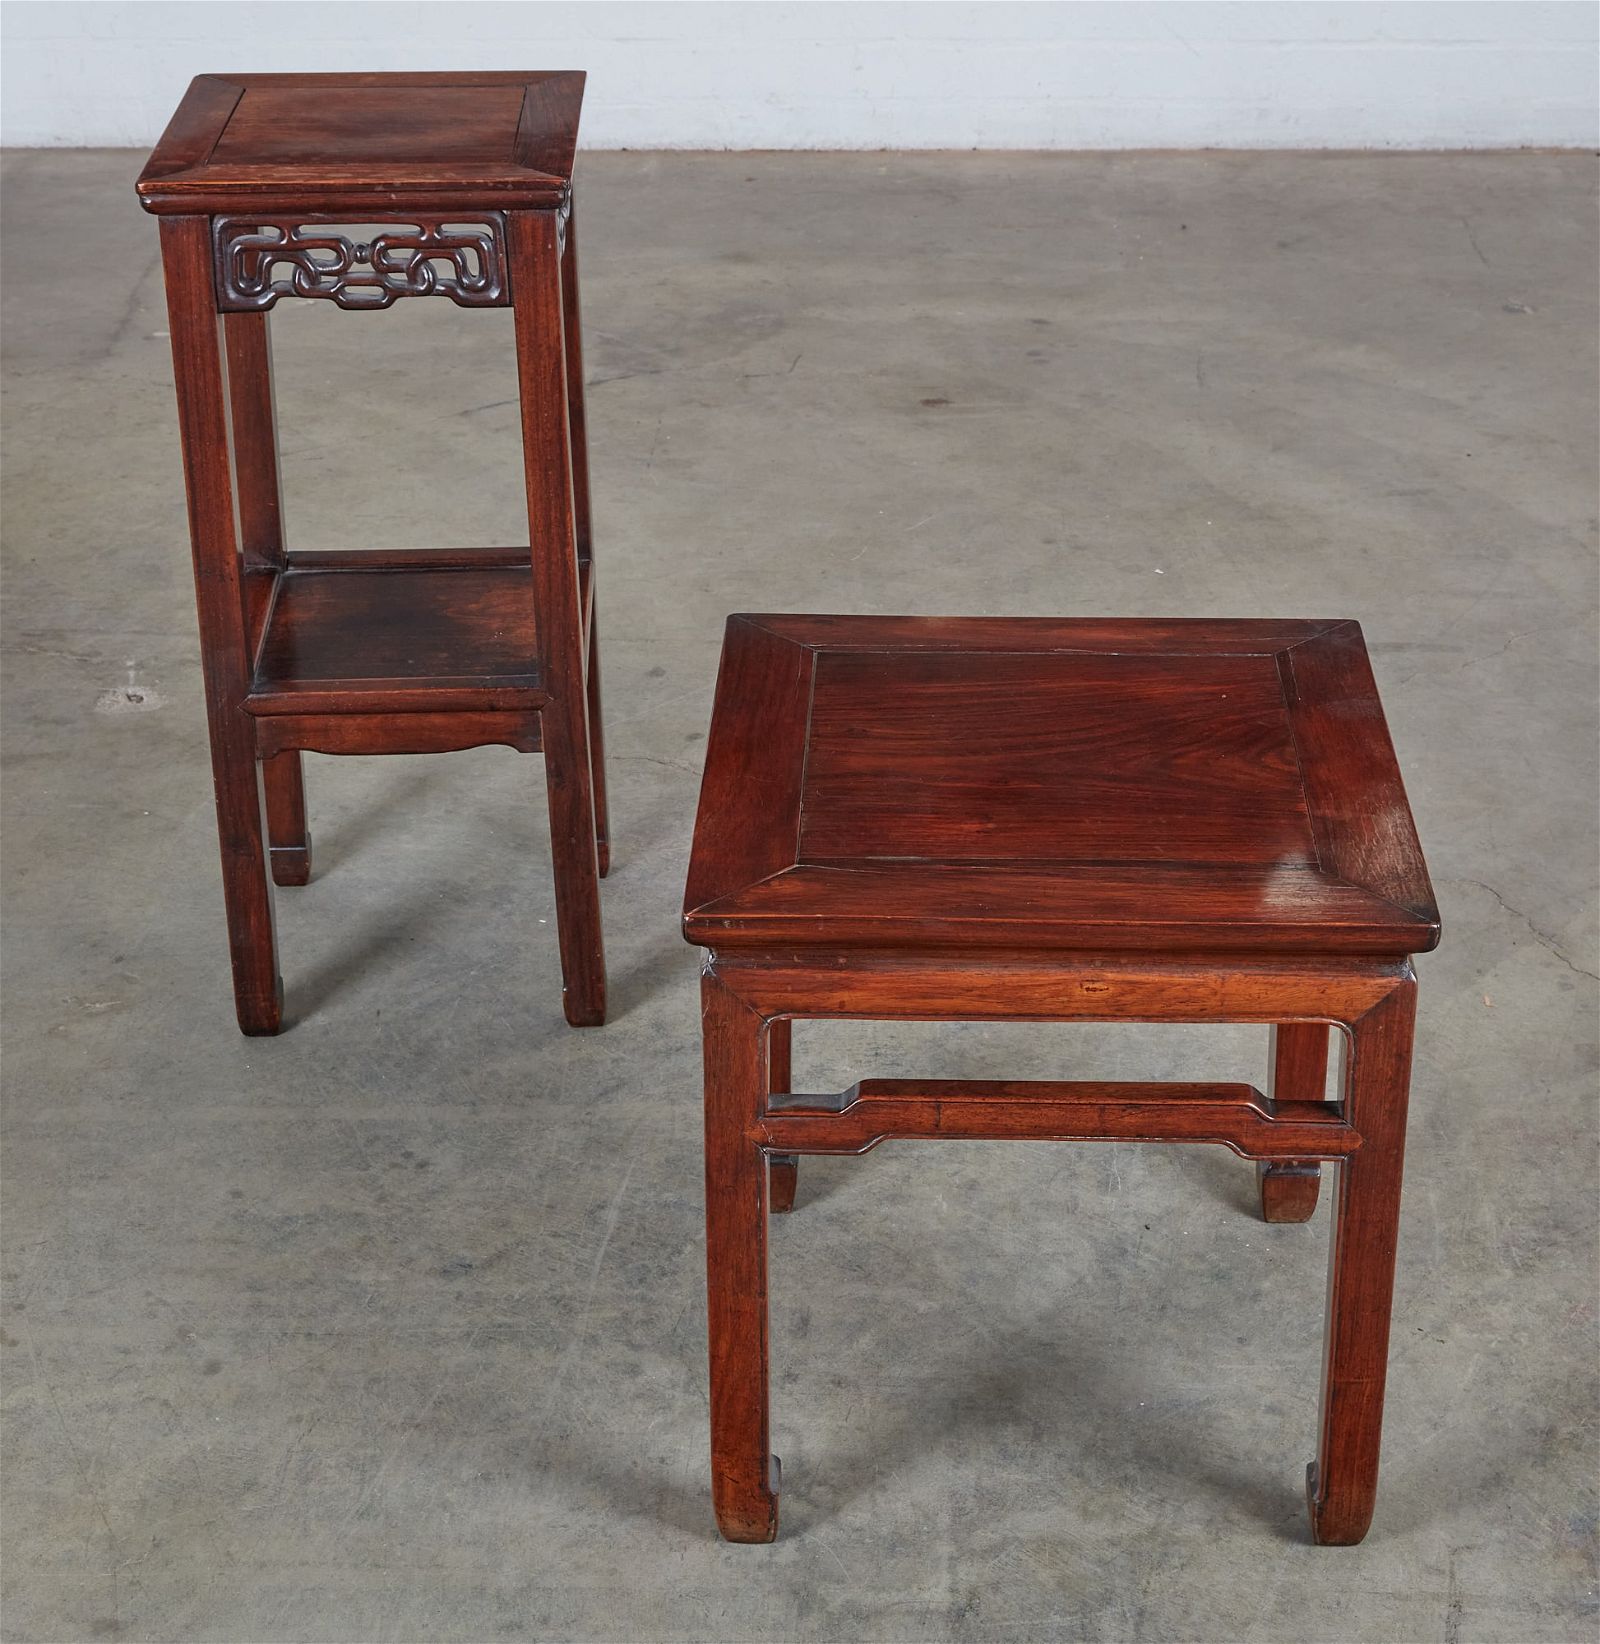 TWO CHINESE EXPORT HARDWOOD TABLESTwo